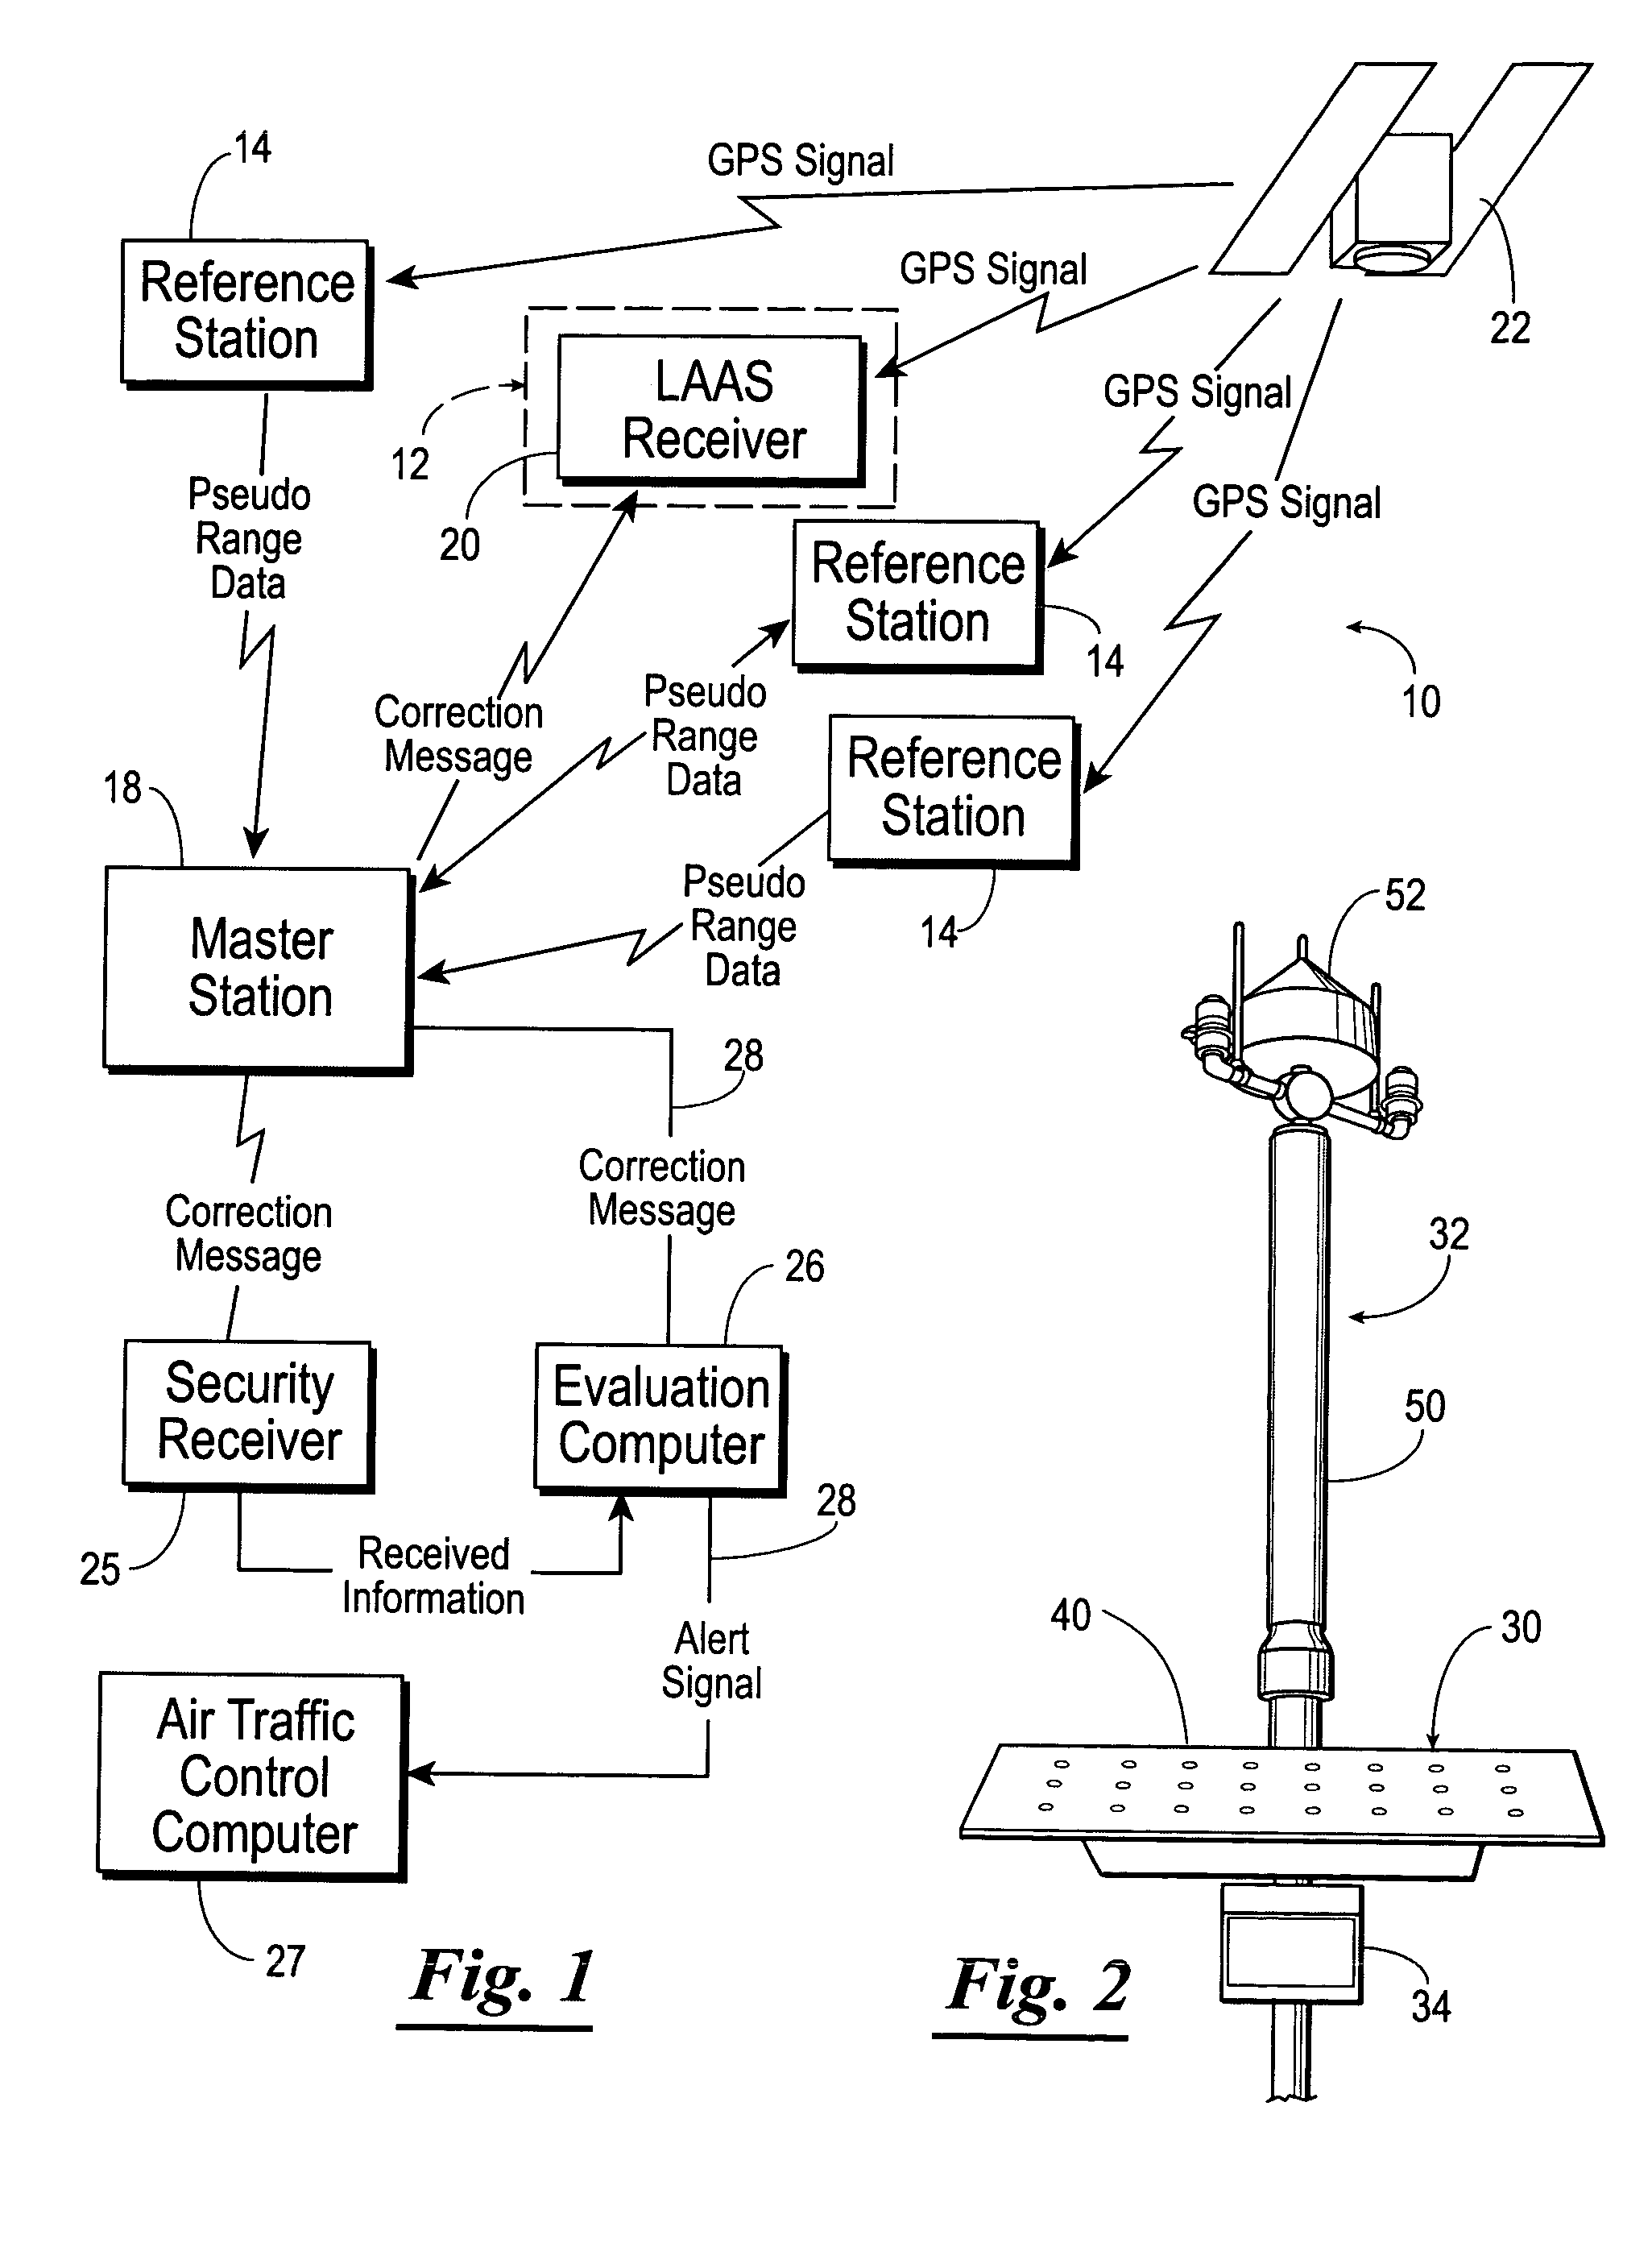 Navigation system using locally augmented GPS